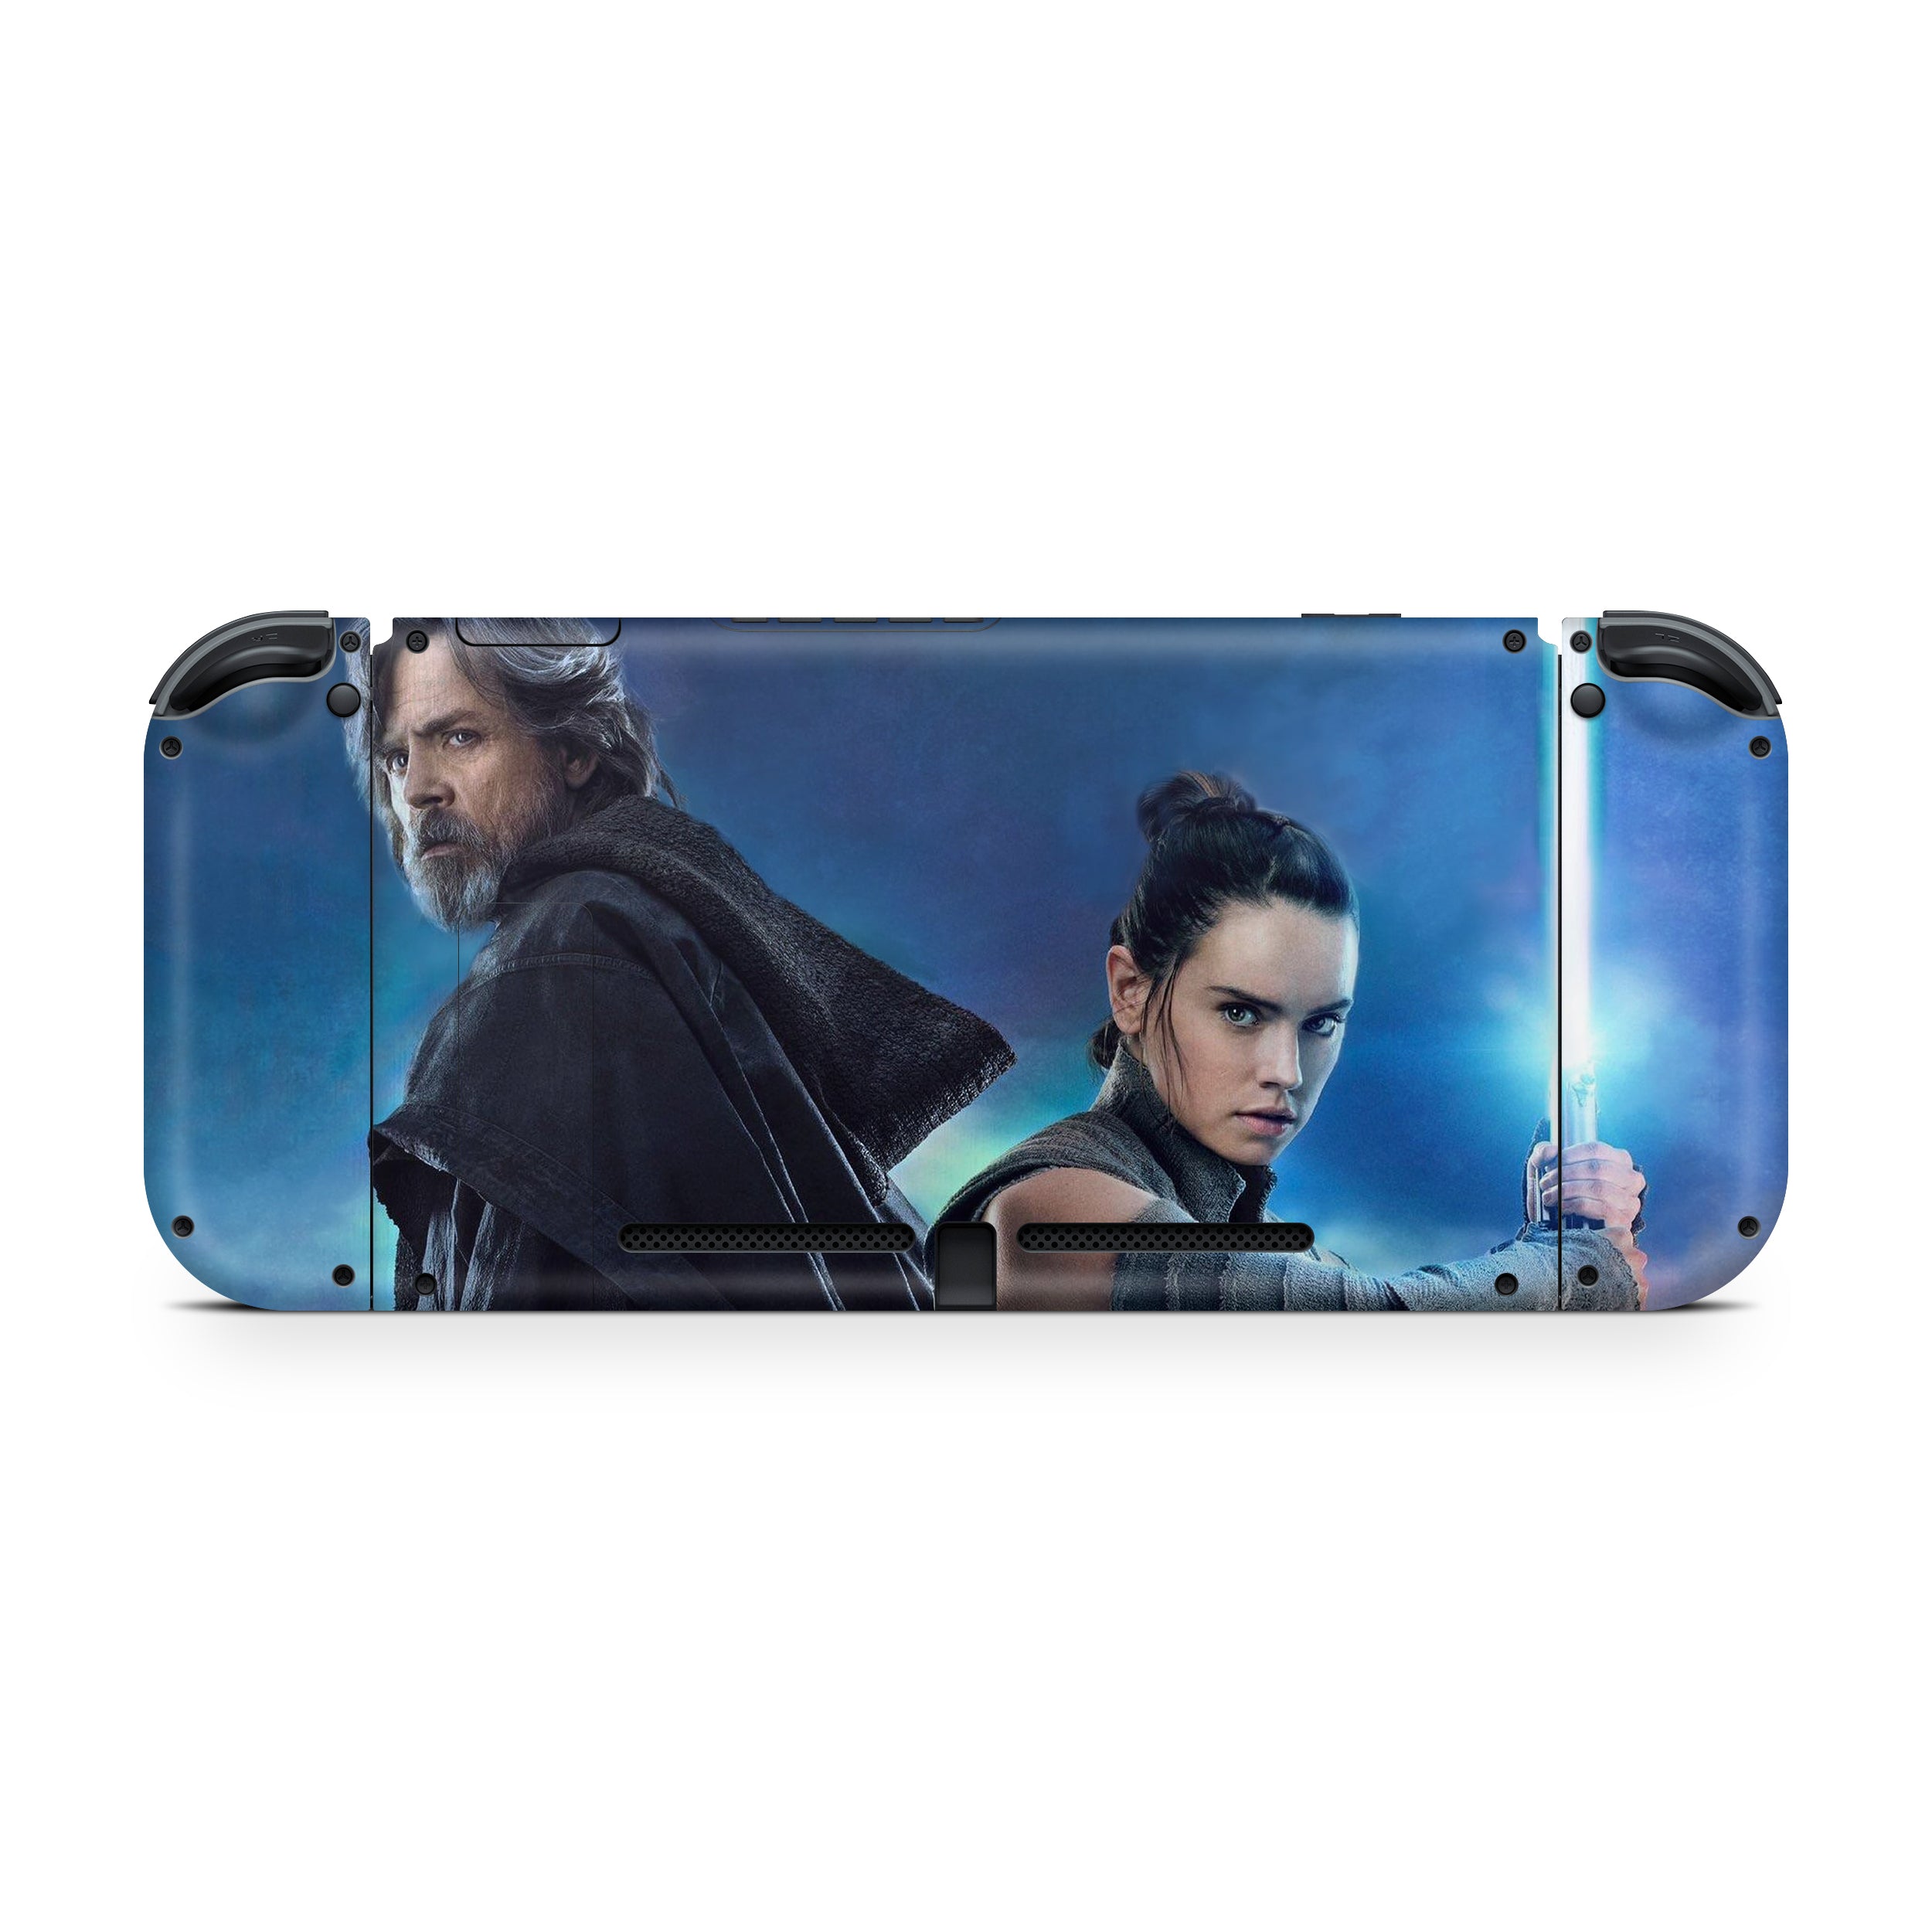 A video game skin featuring a Star Wars Luke Skywalker design for the Nintendo Switch.